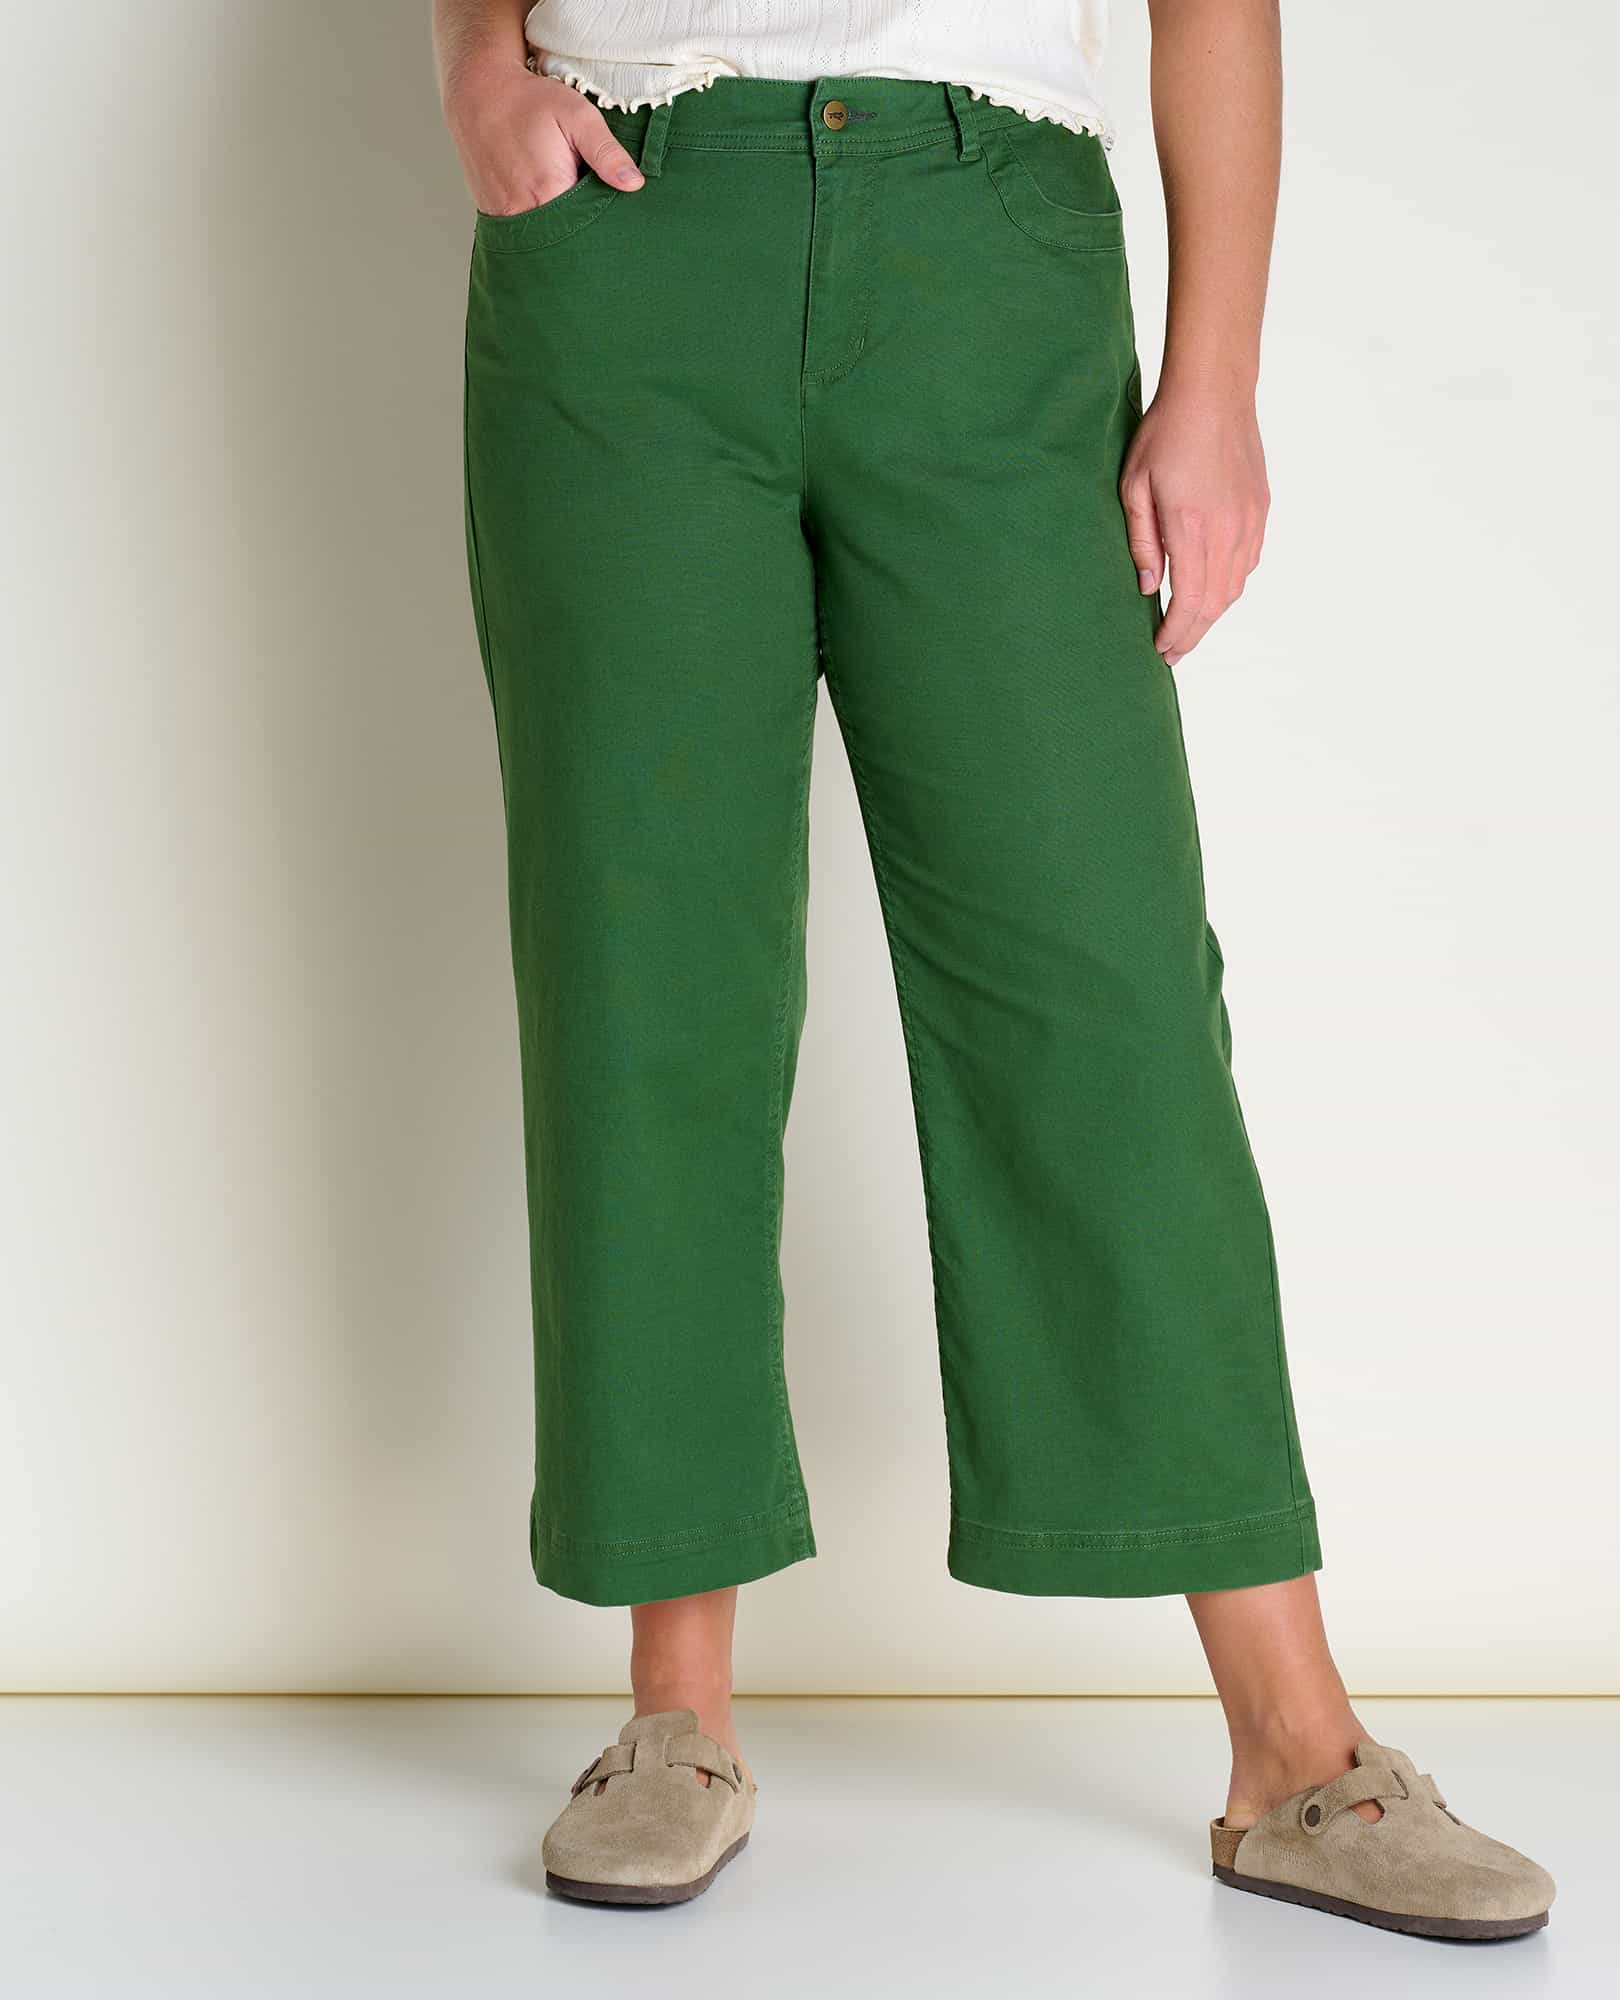 Women's Pants :: Meltdown :: High Waisted Wide Leg Pants with back zip